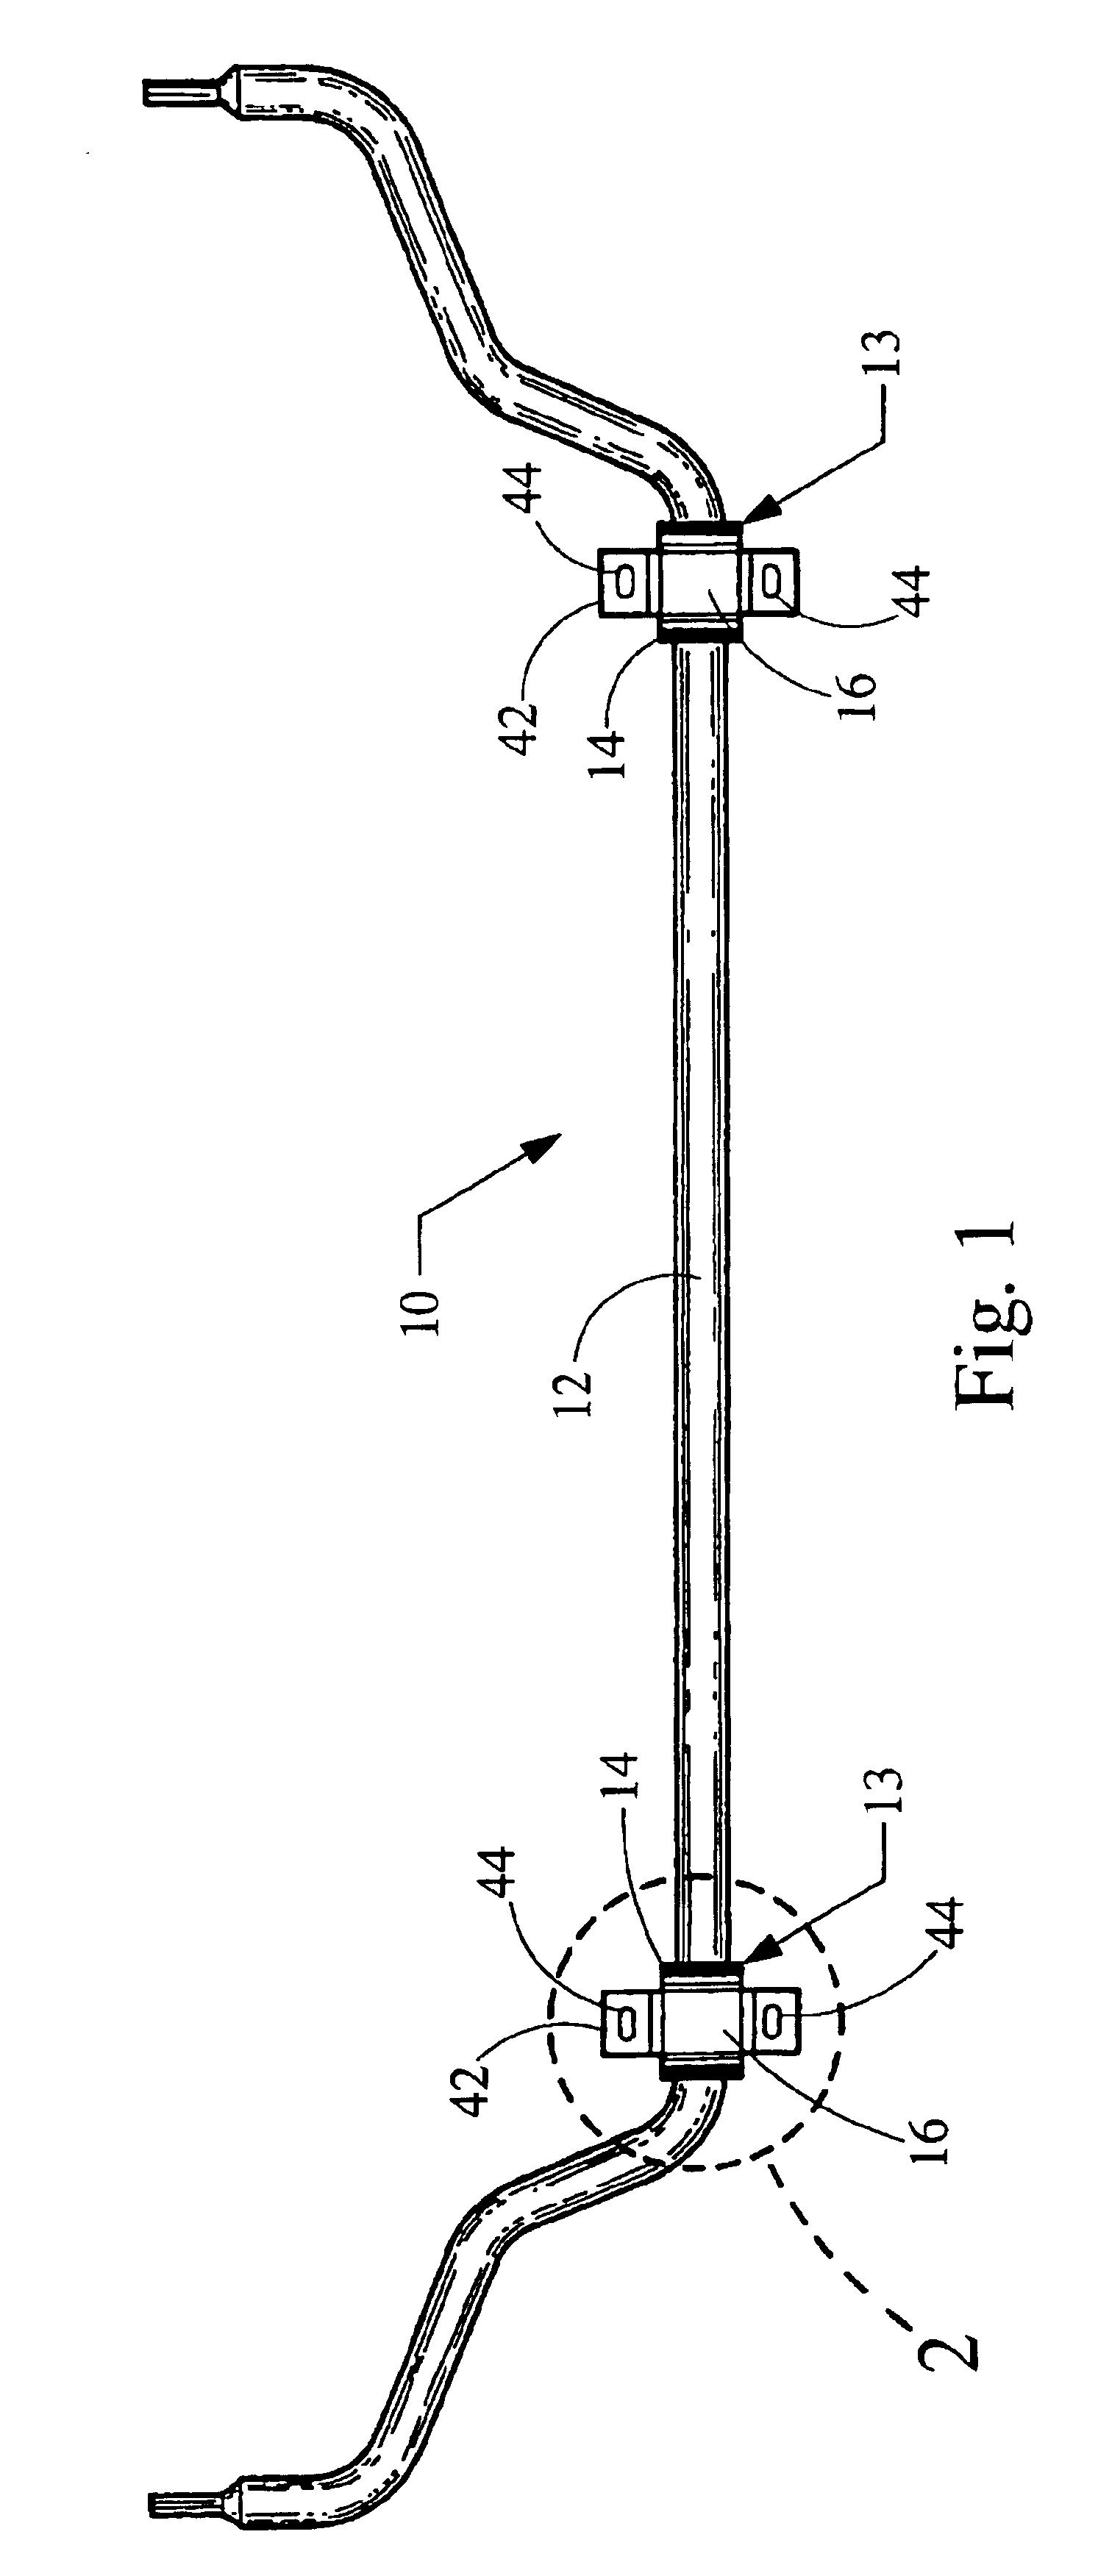 Method of forming compression gripped bushing system